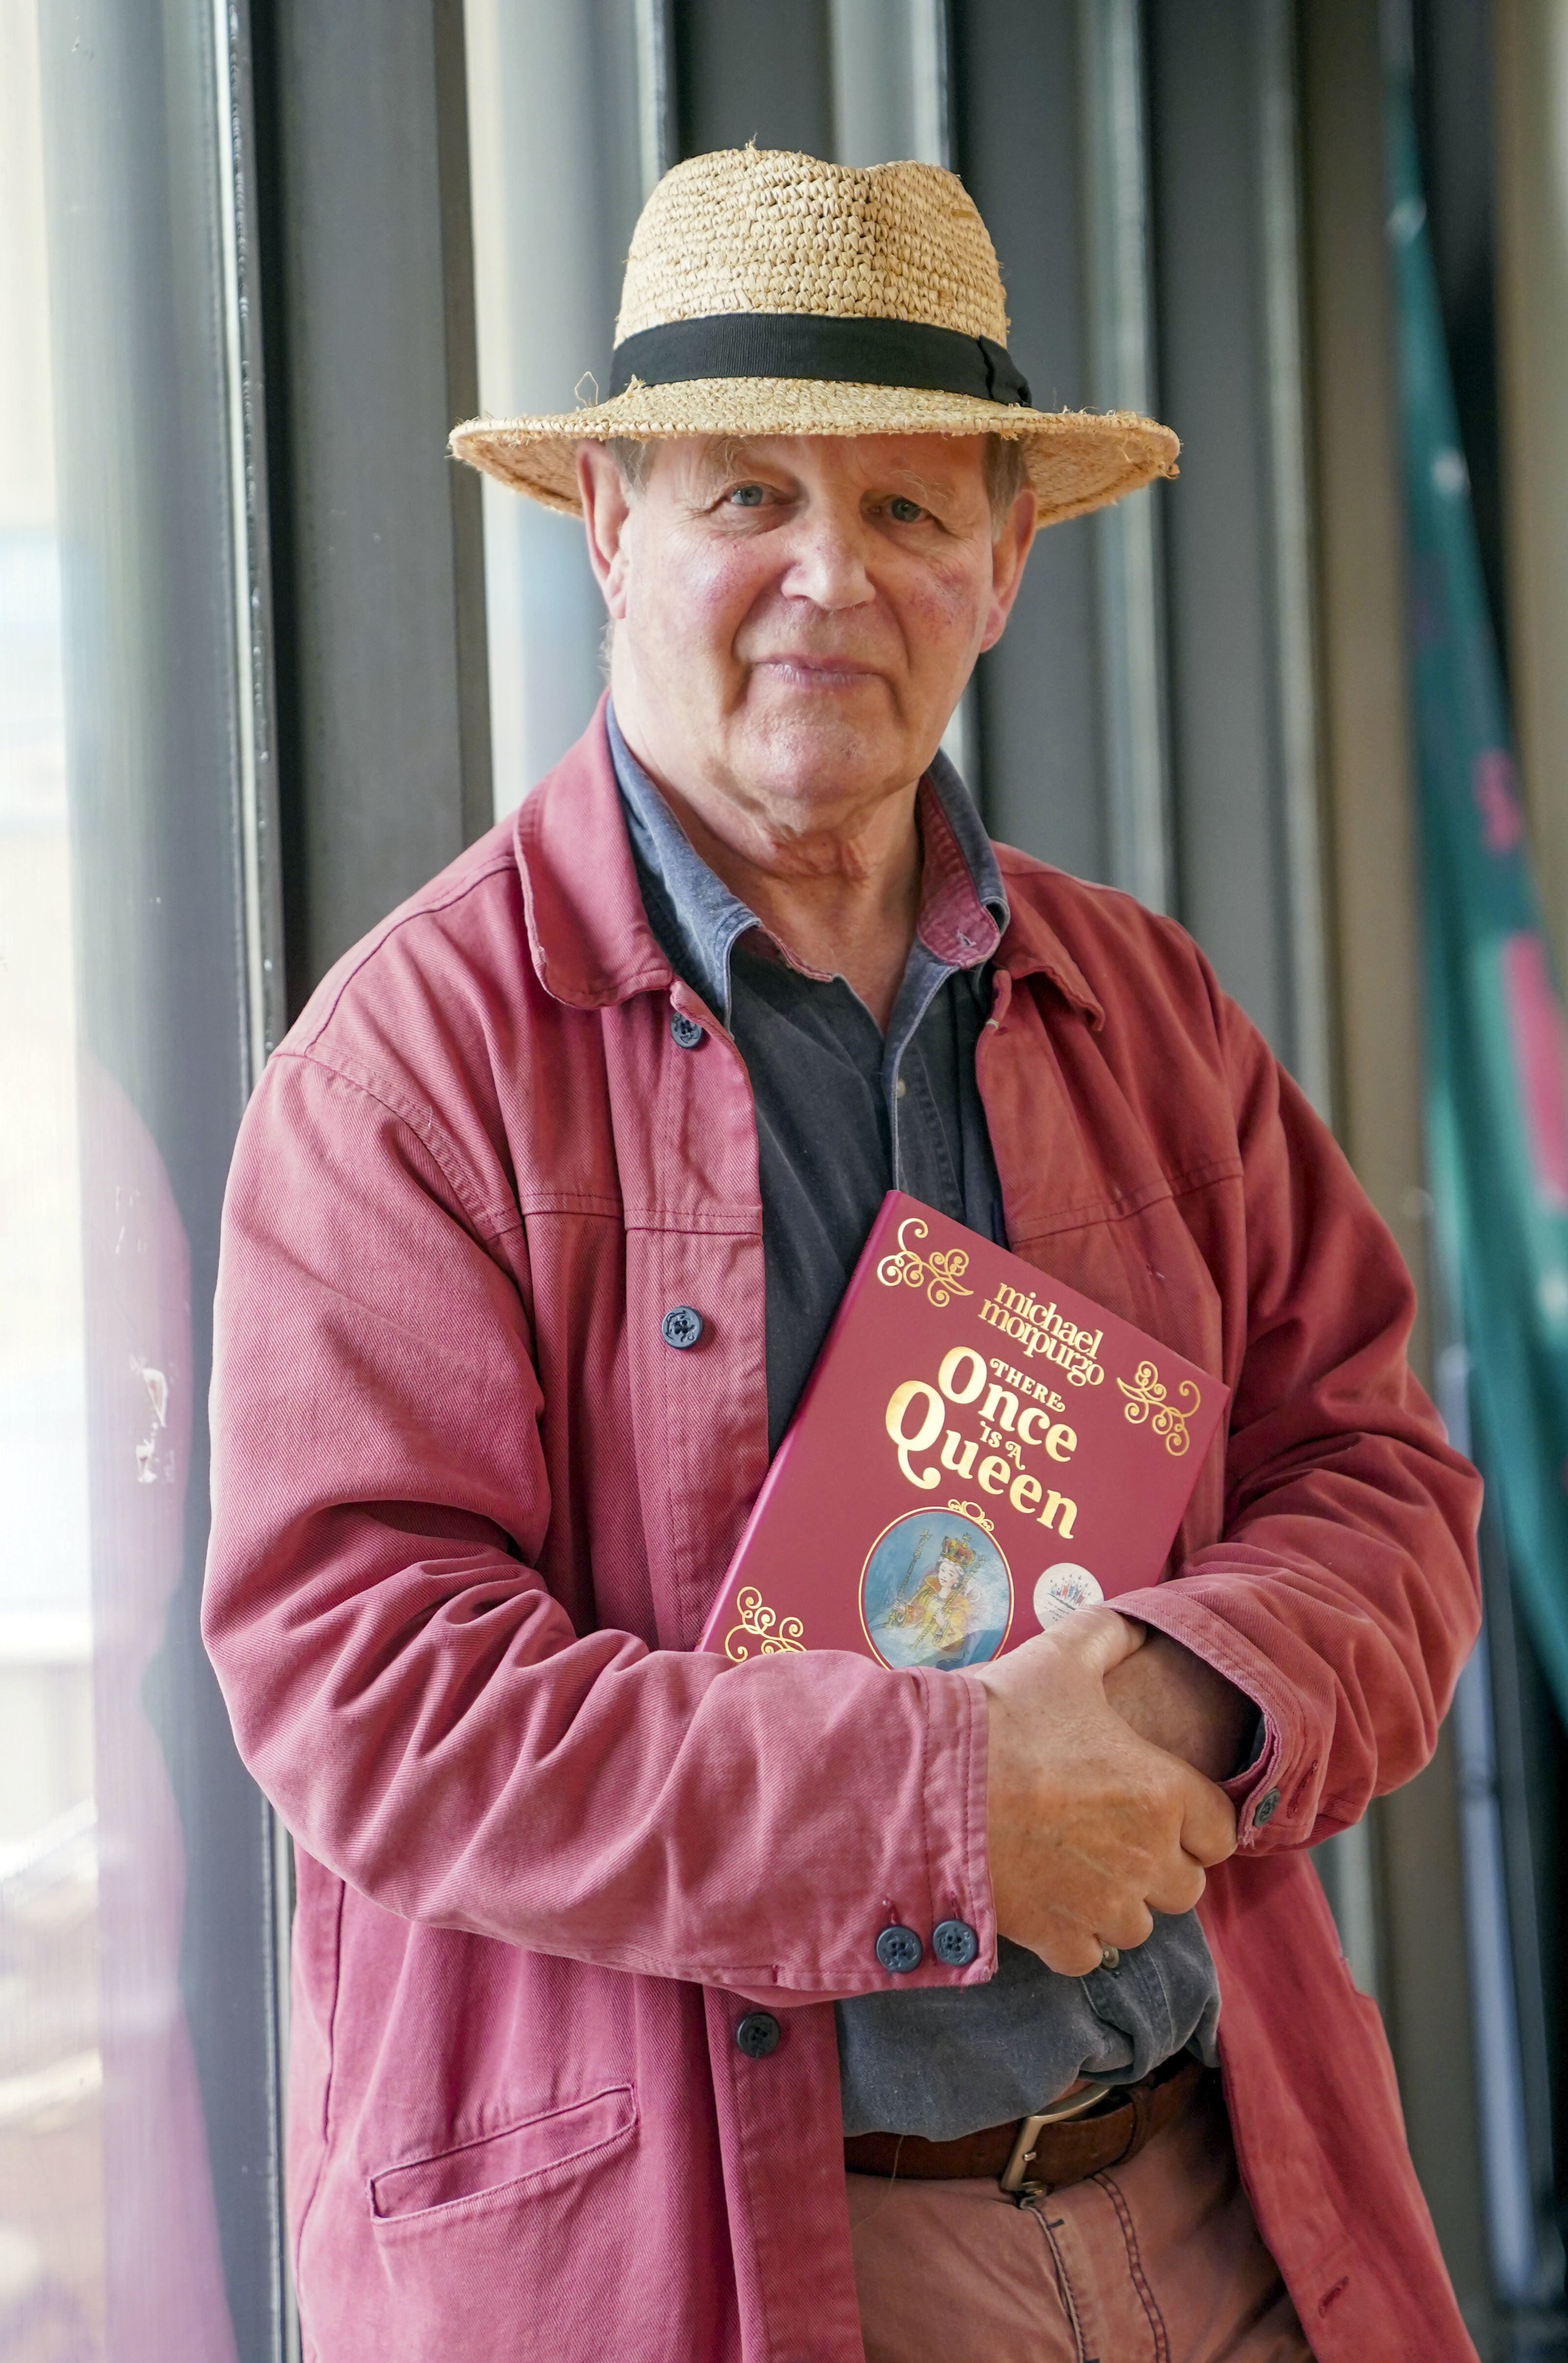 Children’s author Michael Morpurgo after giving a reading from his new book There Once is a Queen, written for the Queen’s Platinum Jubilee (Steve Parsons/PA)